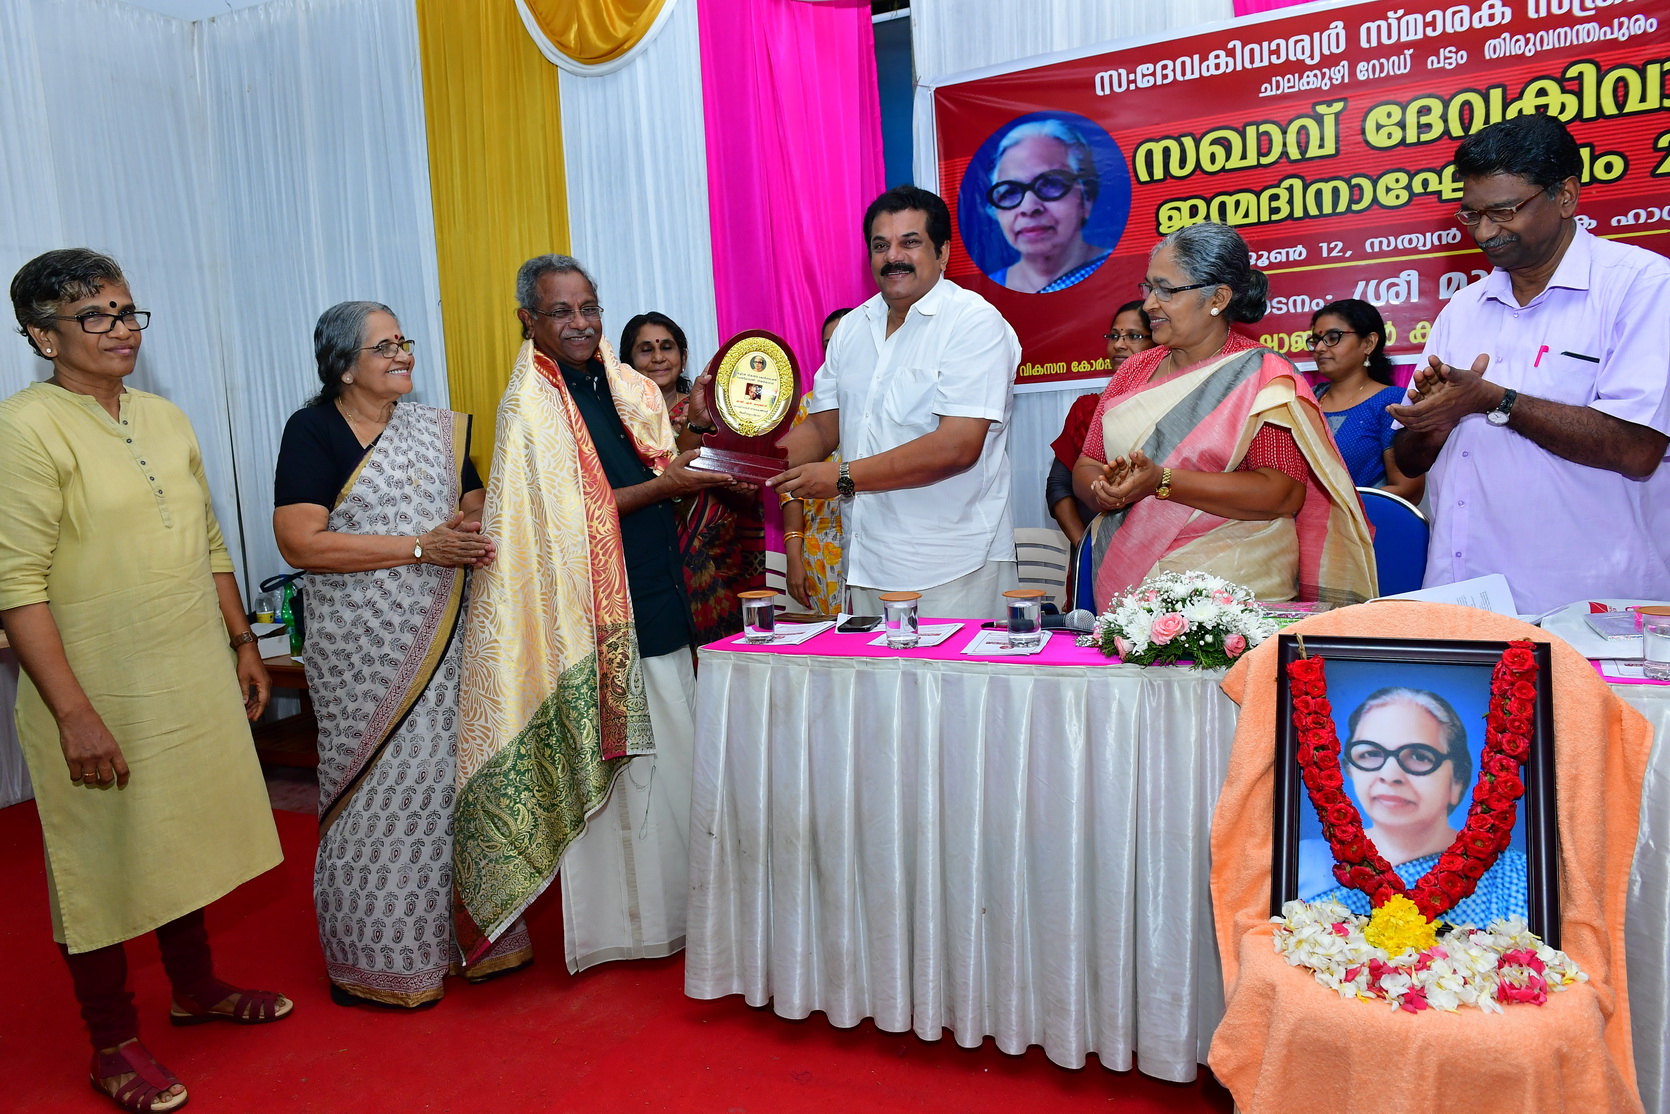 MLA Mukesh inaugurated 96th birth anniversary of Devaki warrier 2019 with a very enlightening and informative speech .